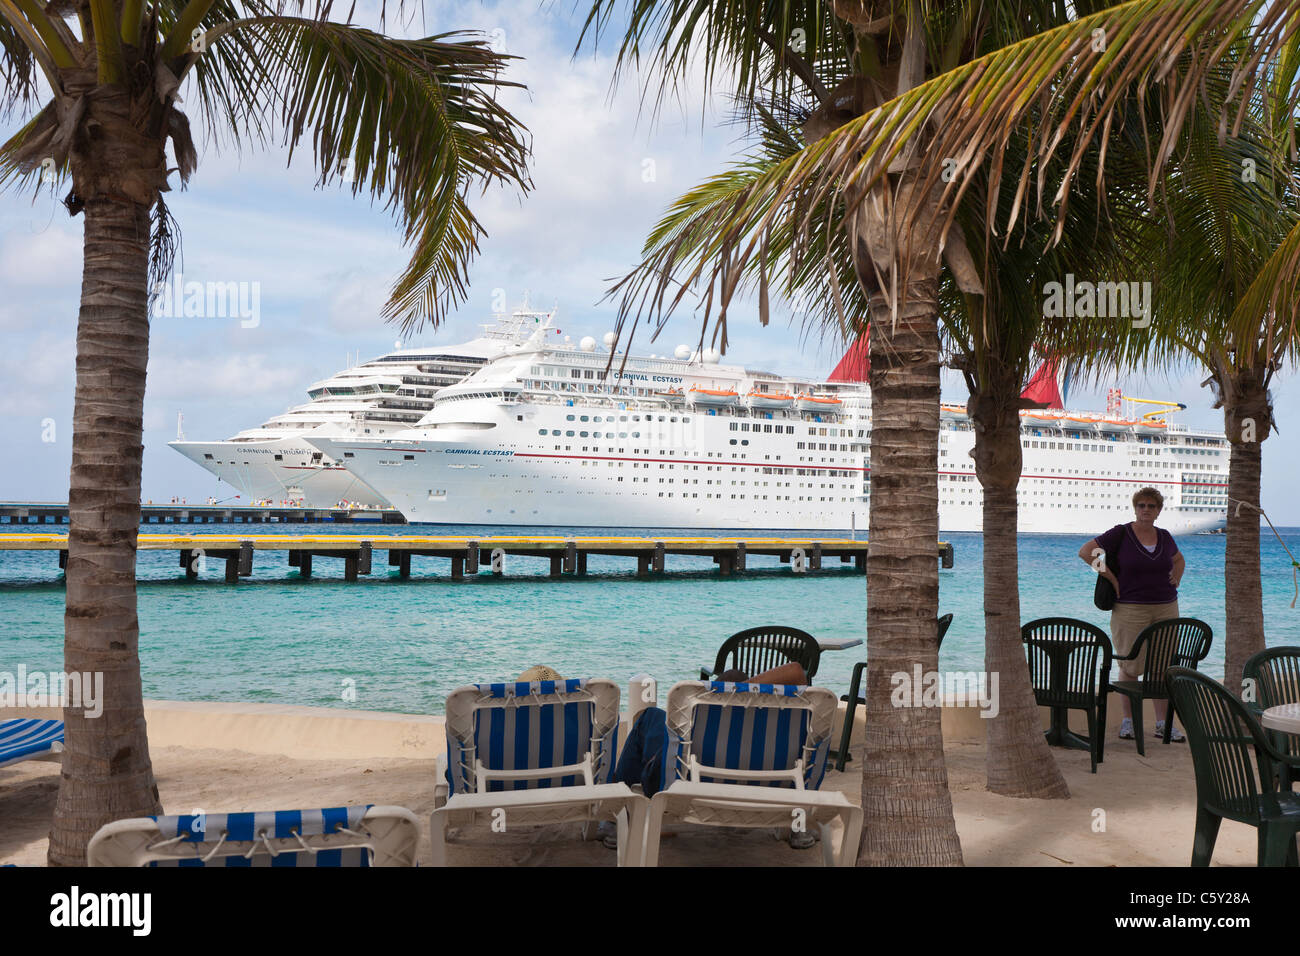 Carnival cruise ships Triumph and Ecstasy at pier are seen through palm trees at the port of Cozumel, Mexico in the Caribbean Stock Photo